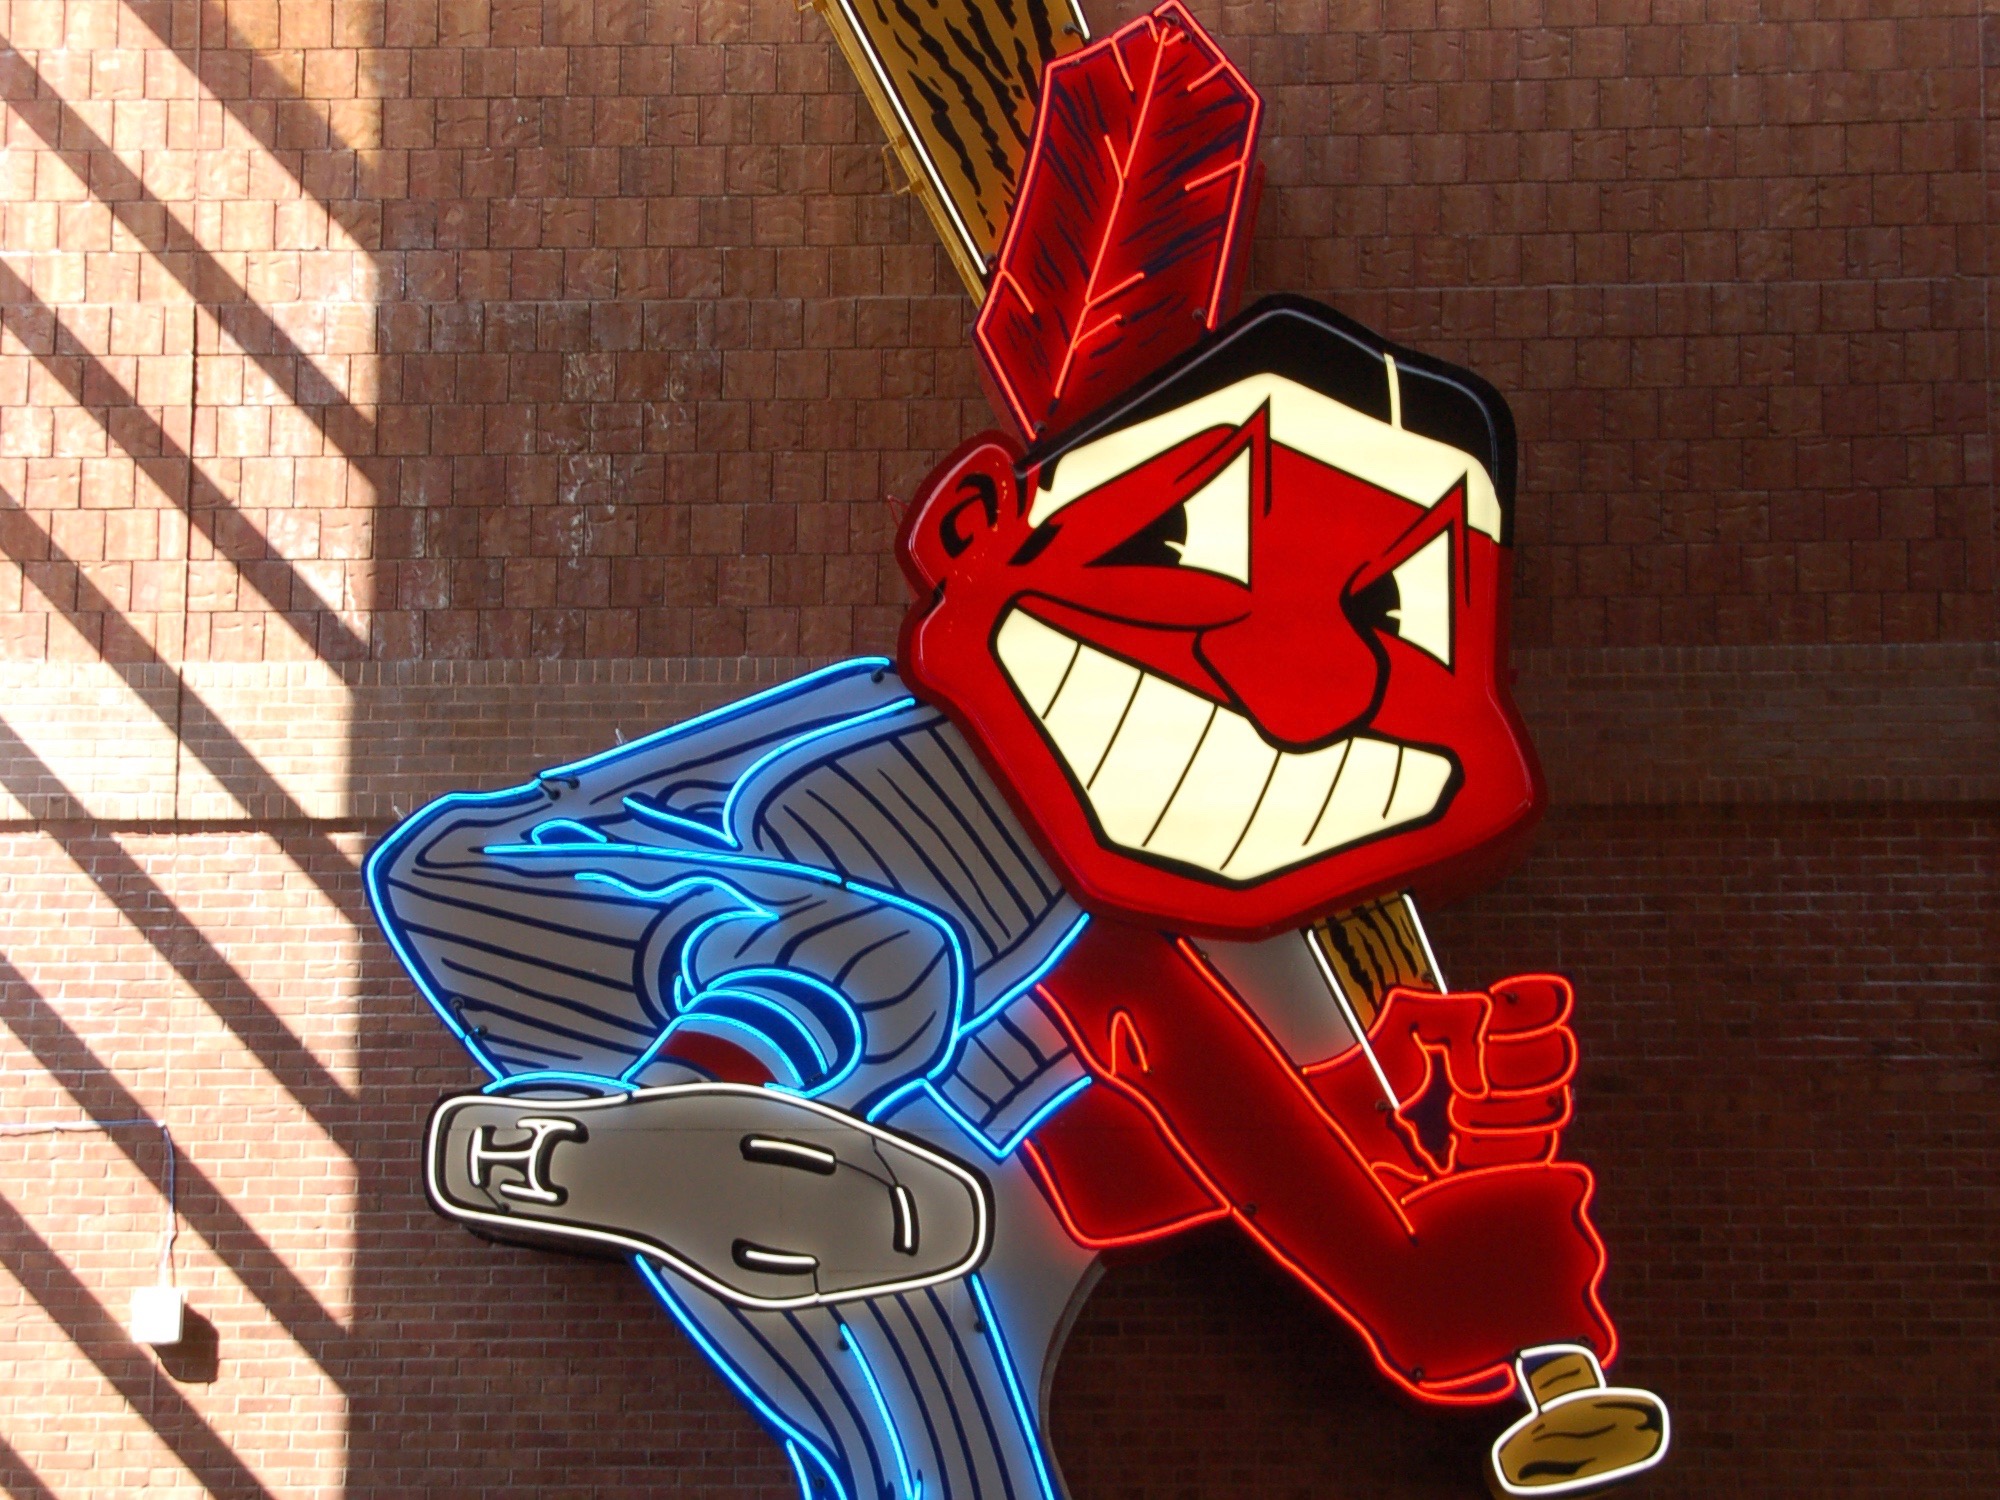 Chief Wahoo Strikes Out